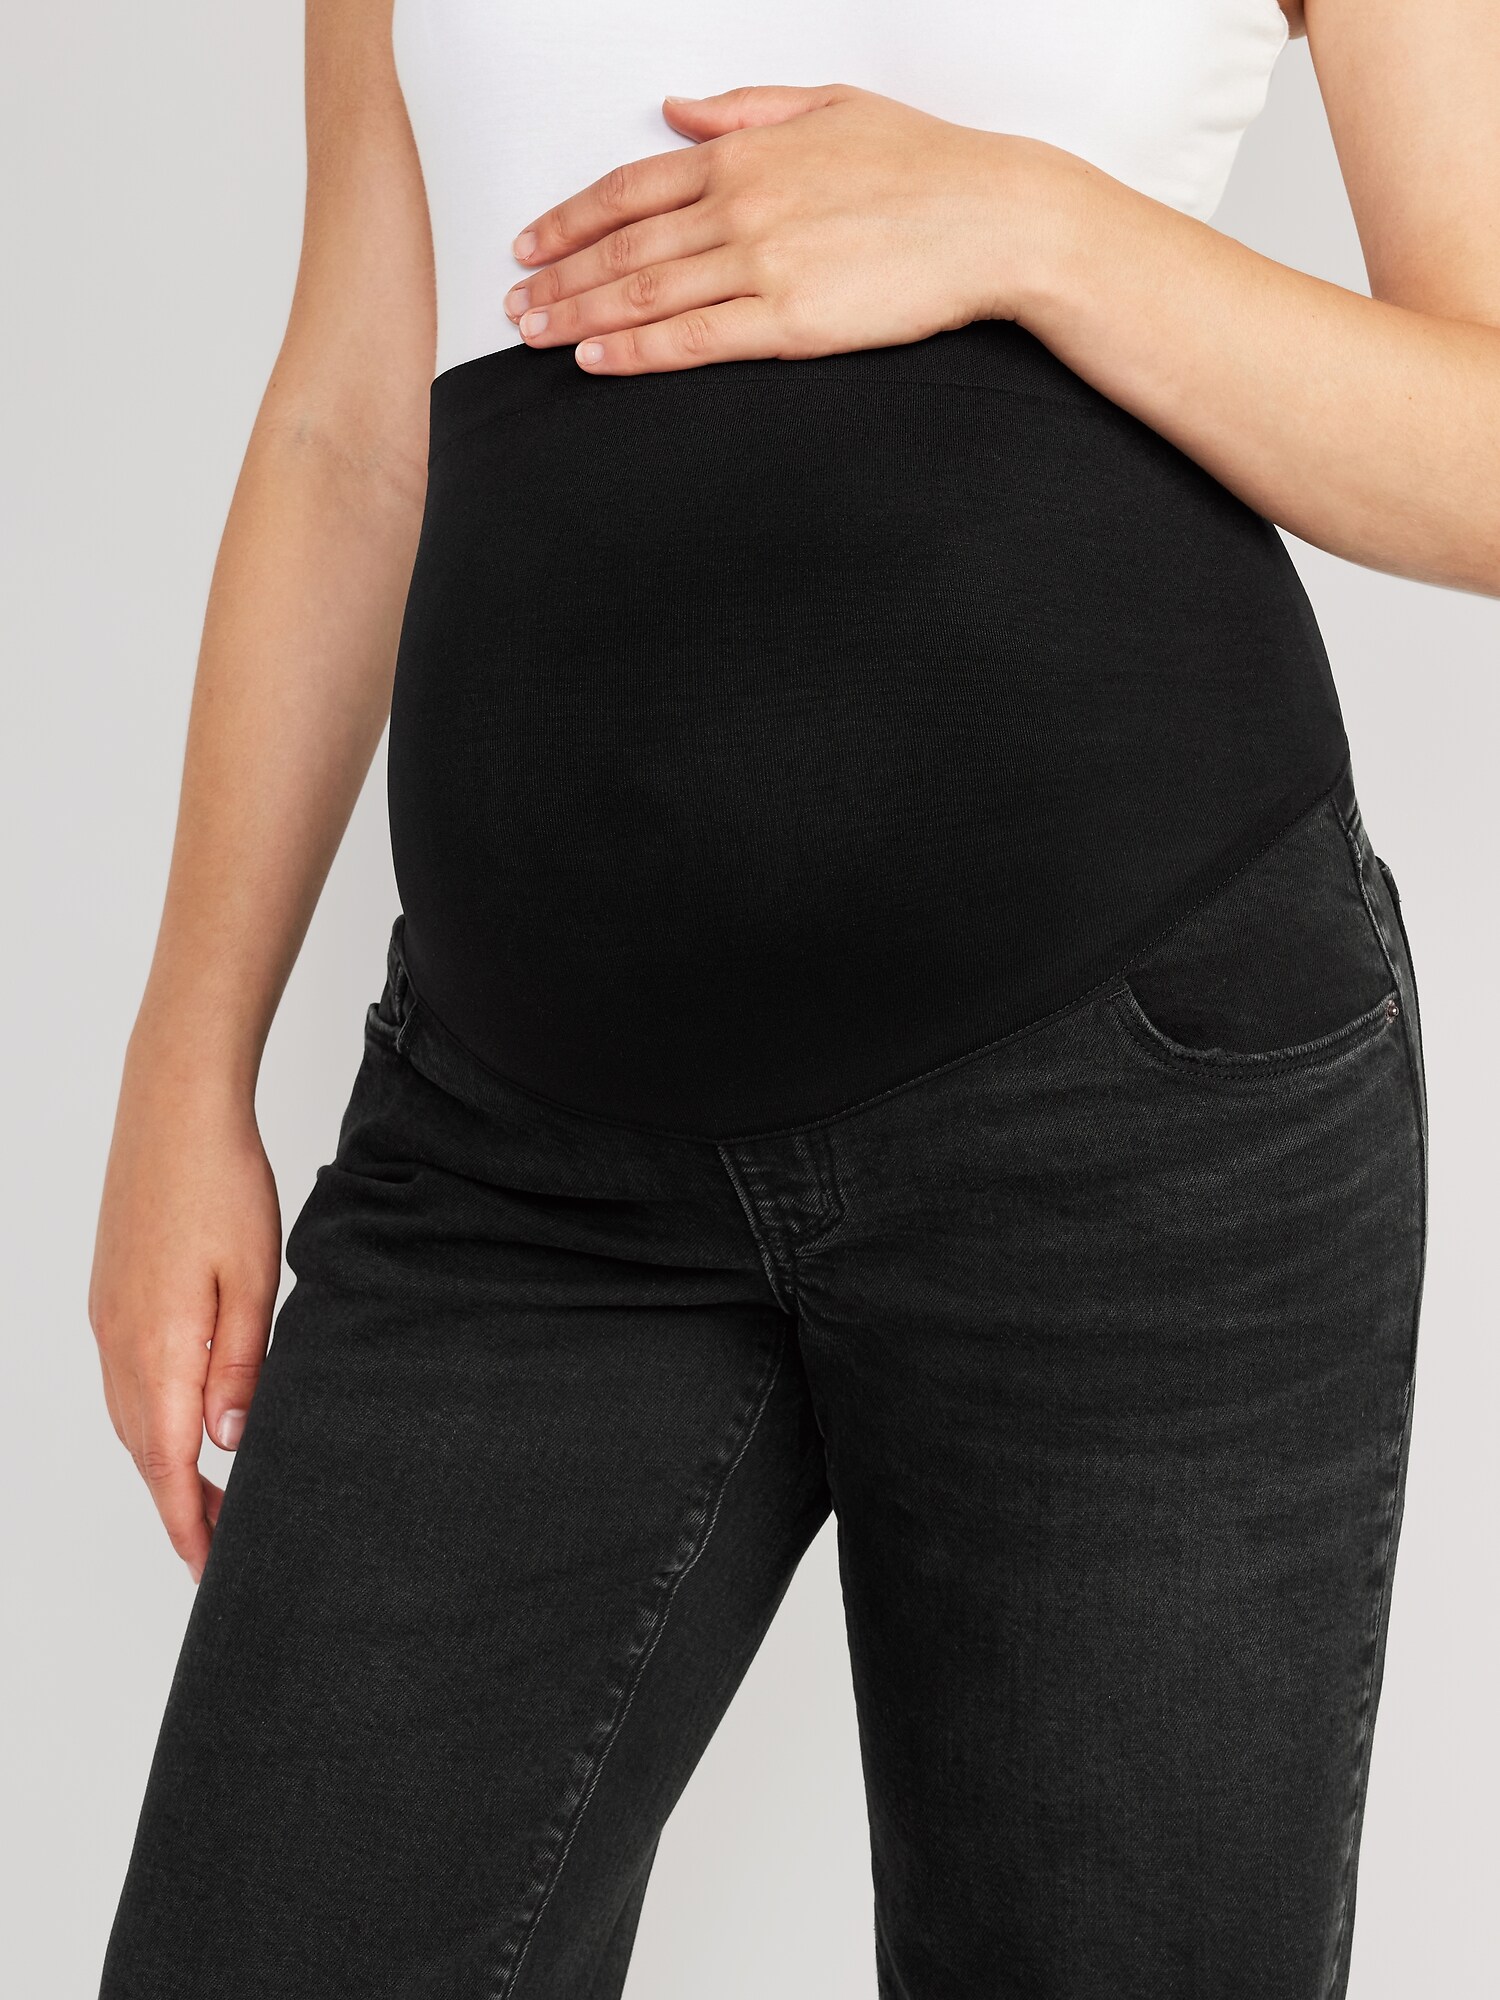 *New* Olive J Brand Jeans For A Pea In The Pod Collection Maternity Full  Panel Cargo Skinny Maternity Capris